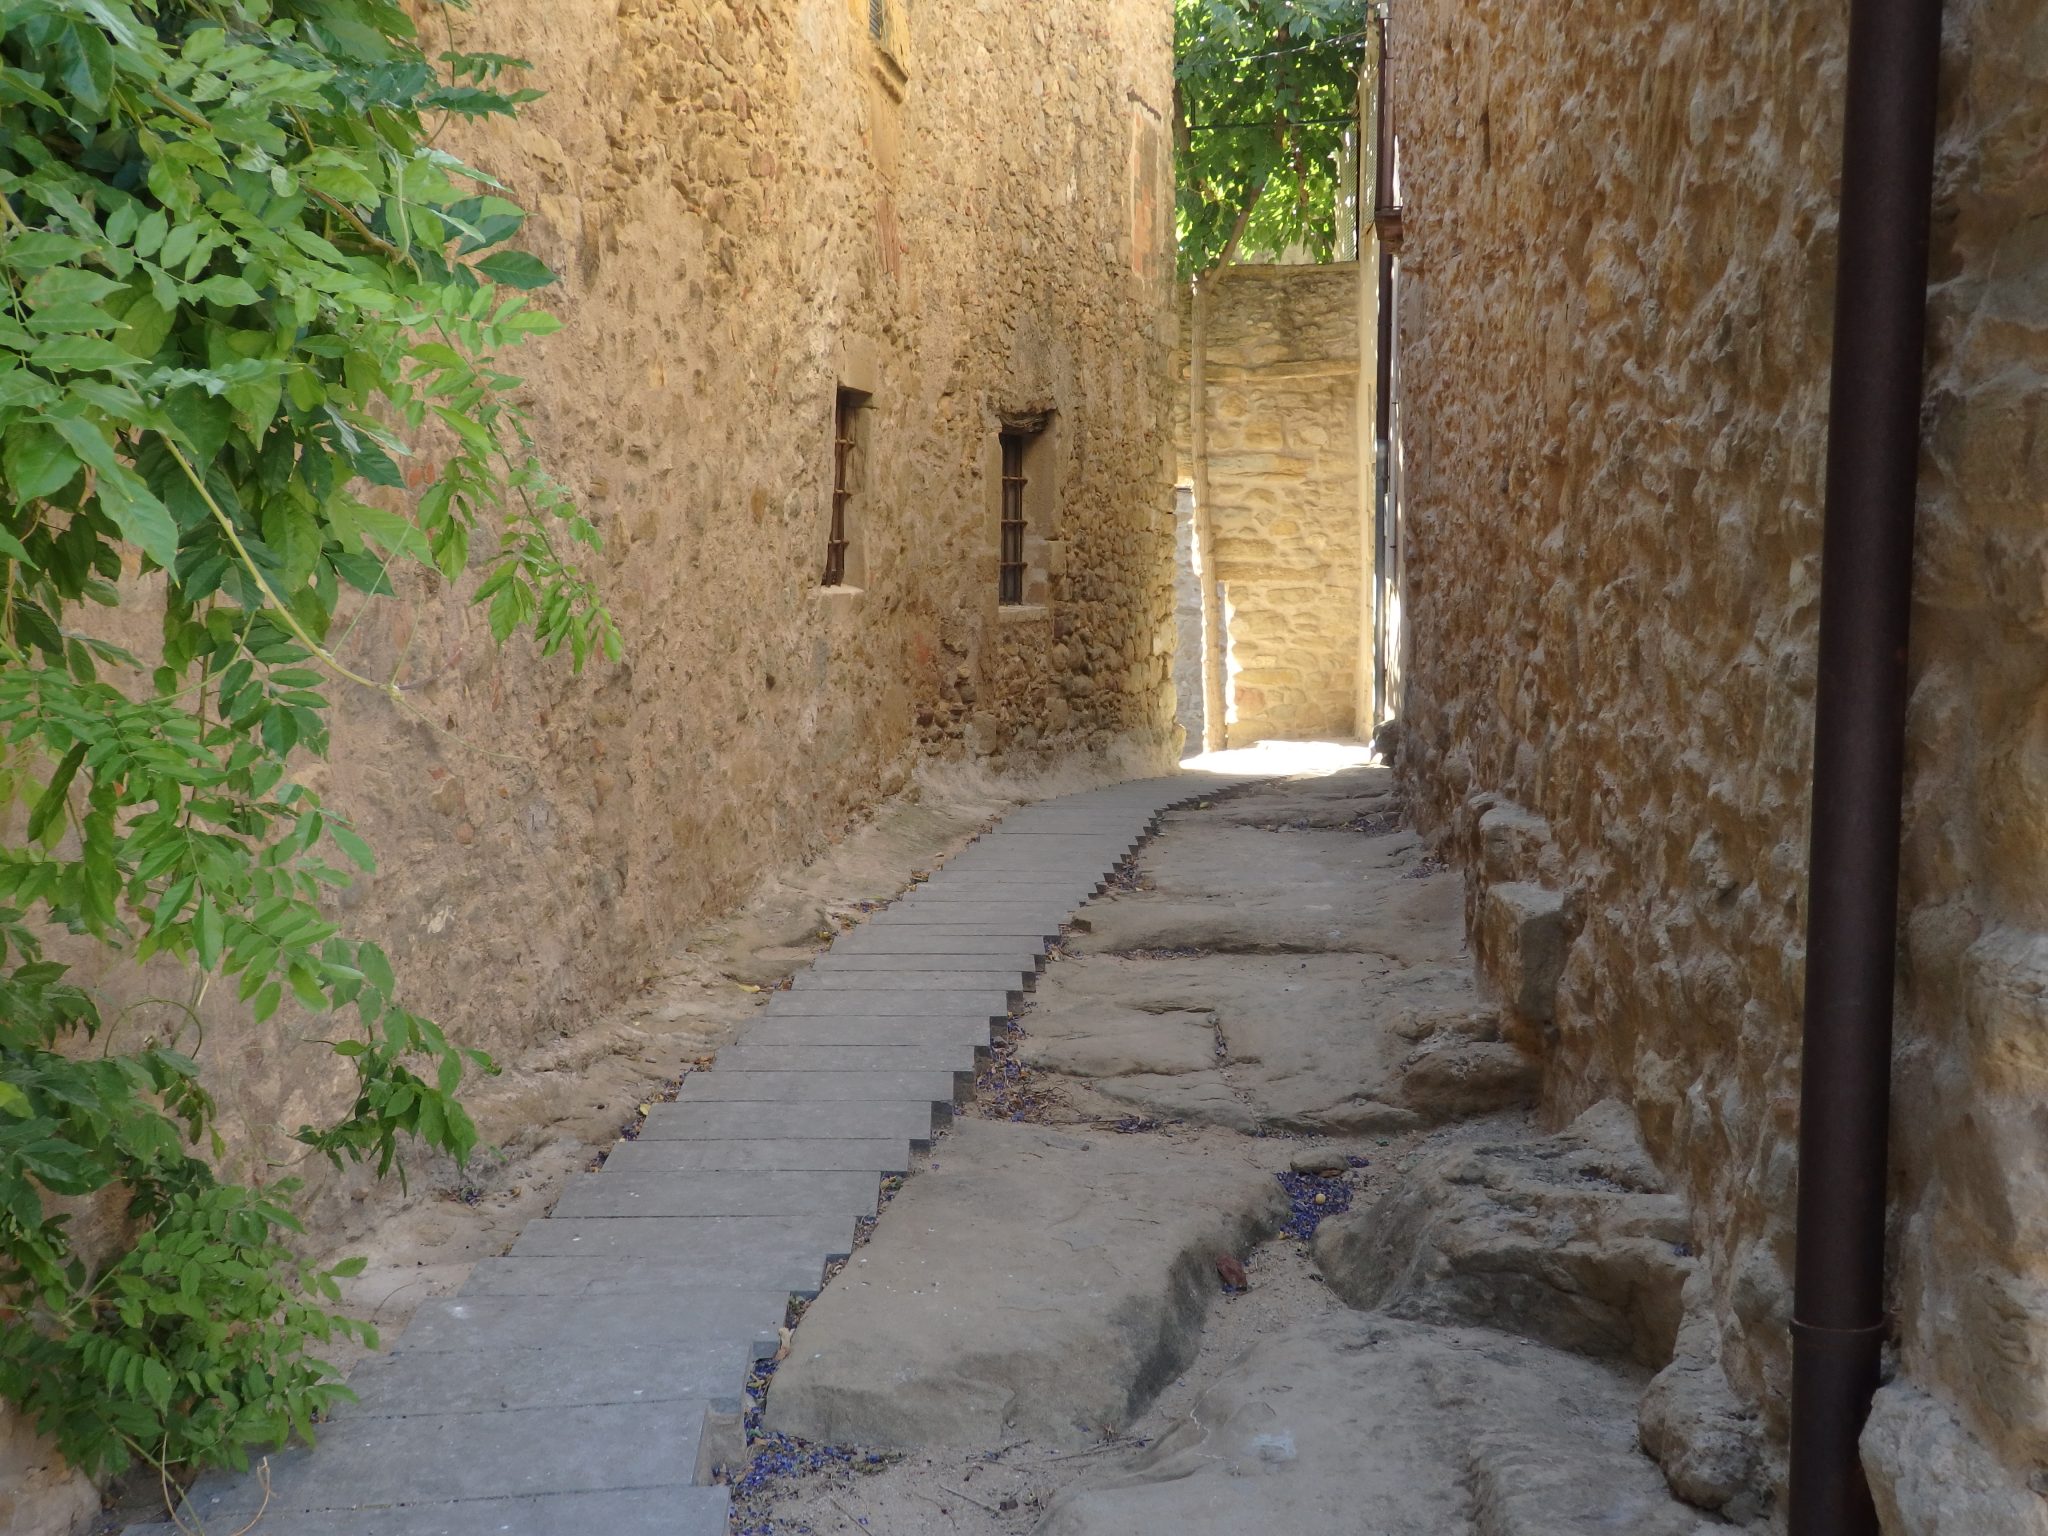 Here you can see the age of the streets in Madremanya, Baix Emporda, Spain